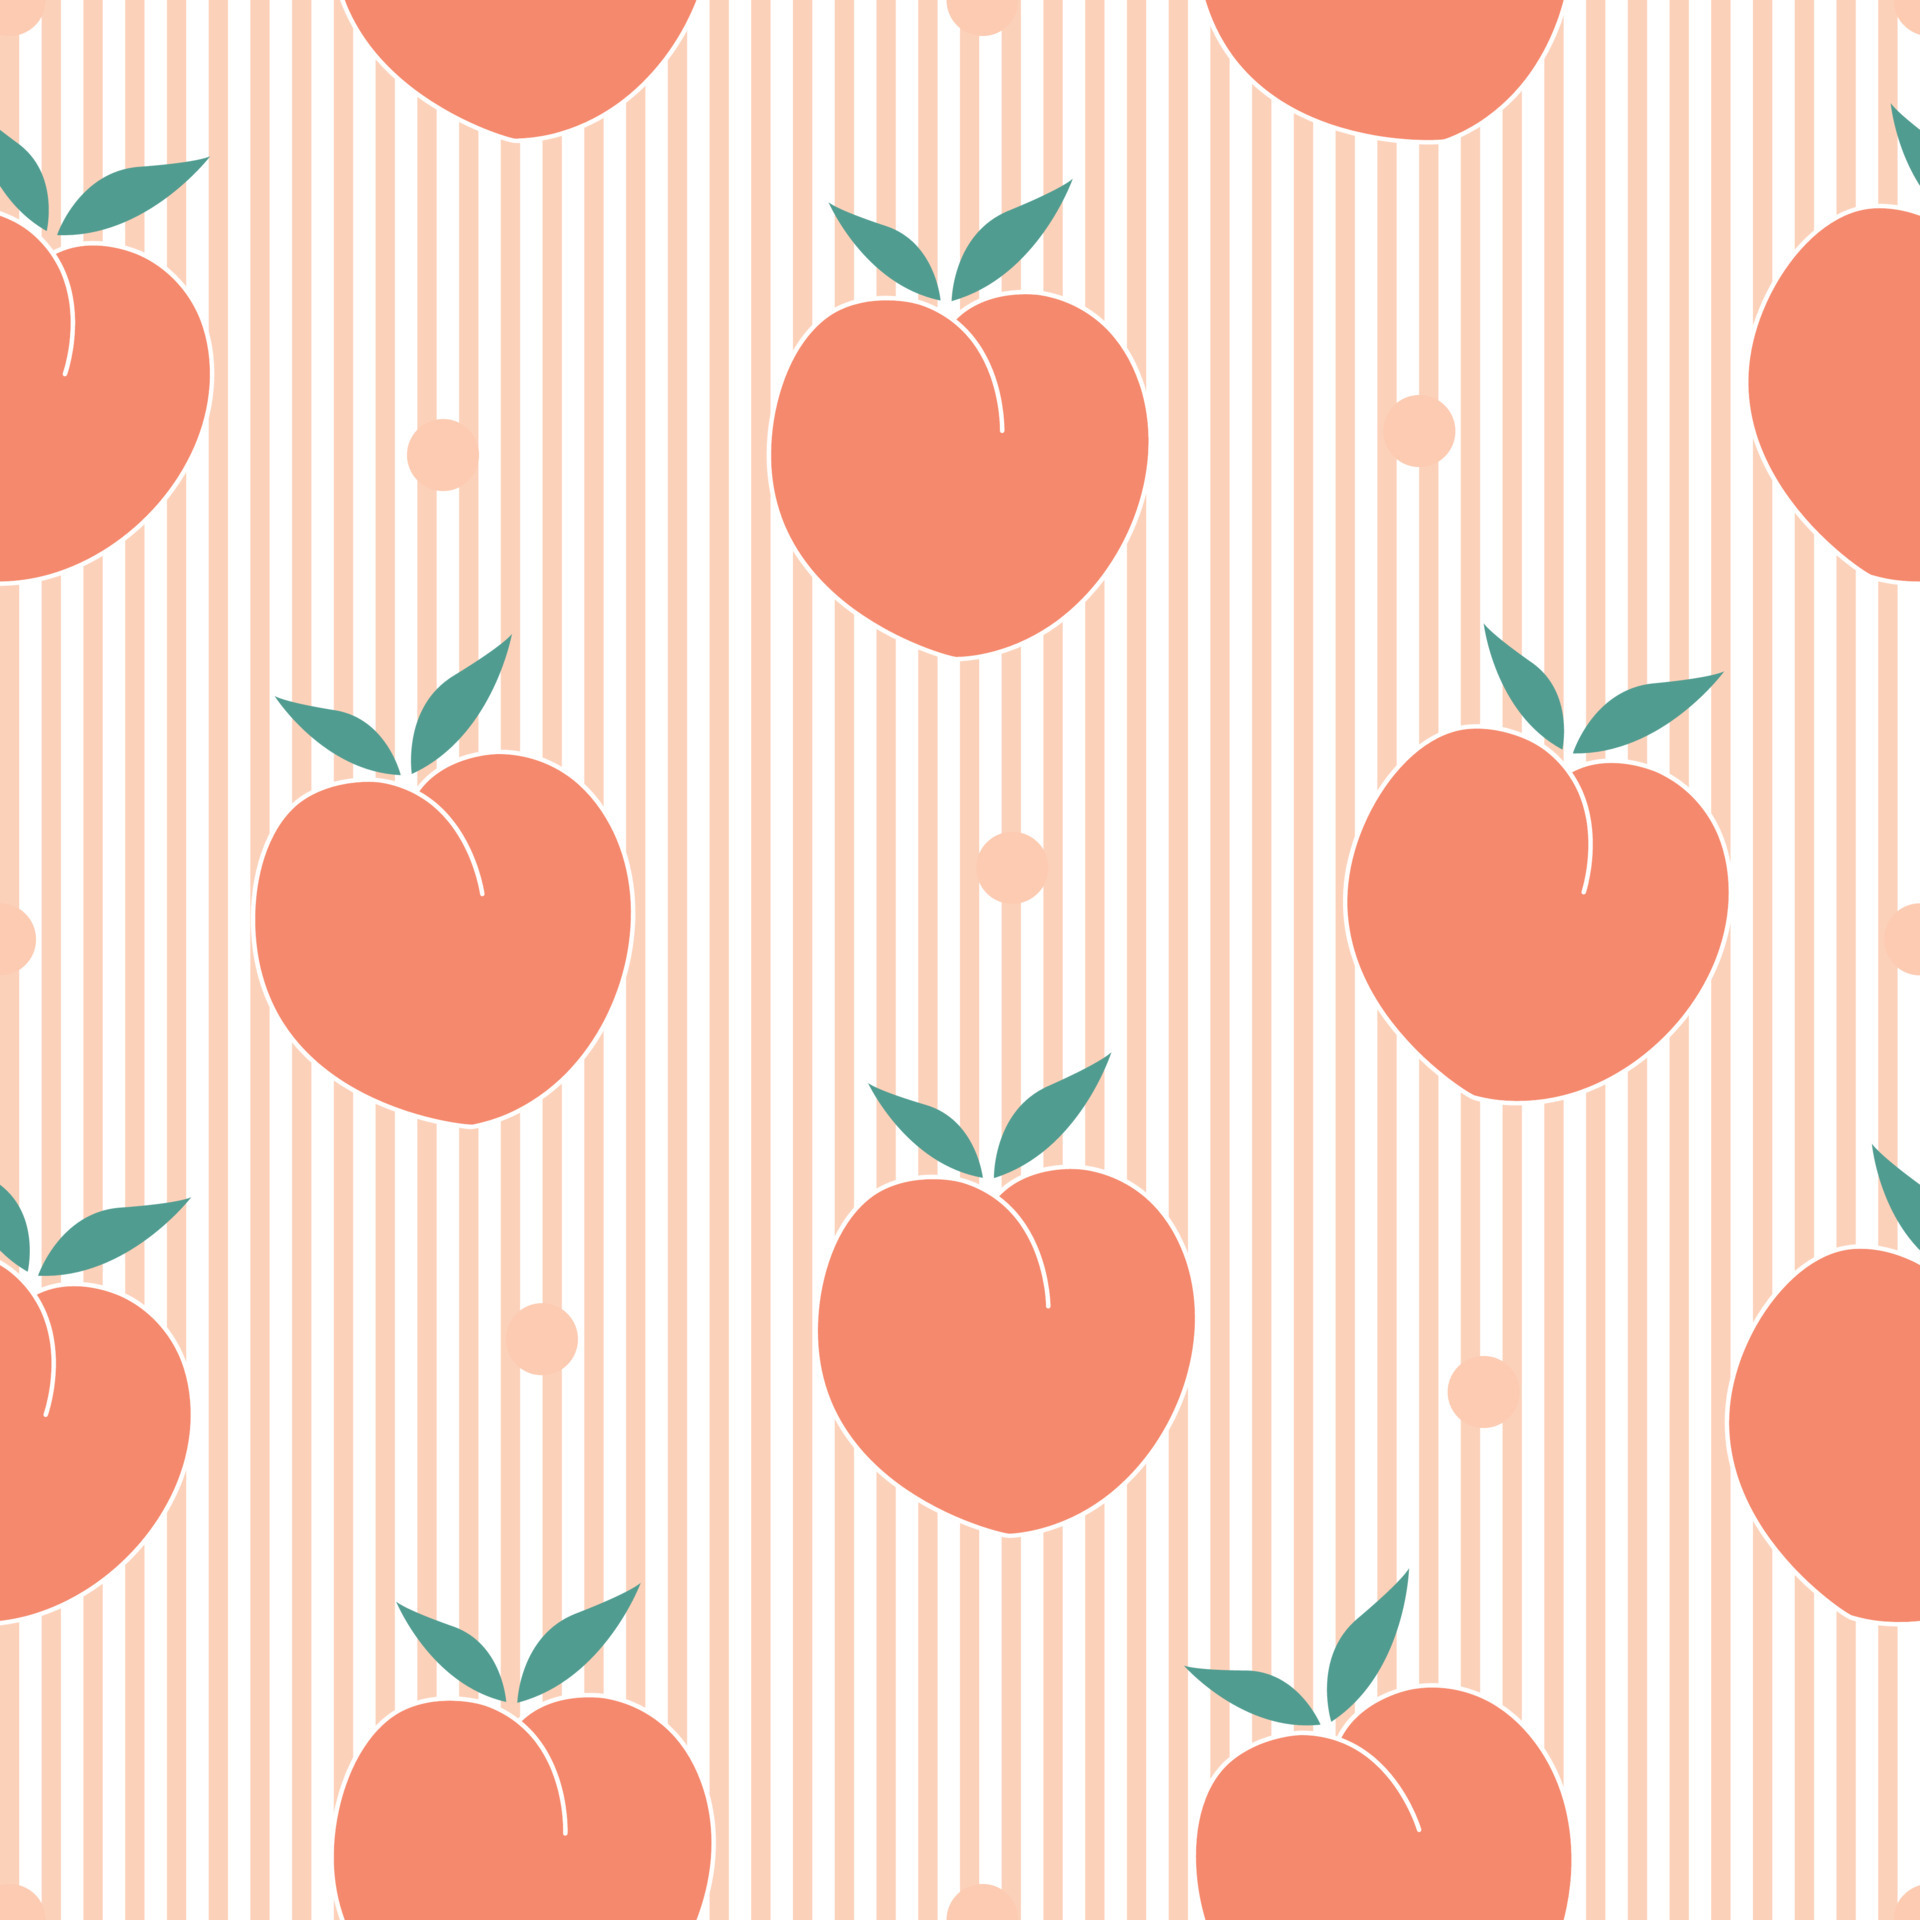 Seamless fruit pattern Orange peach hand drawn cartoon style On the striped background Used for printing, wallpaper, fabric, textiles Vector illustration